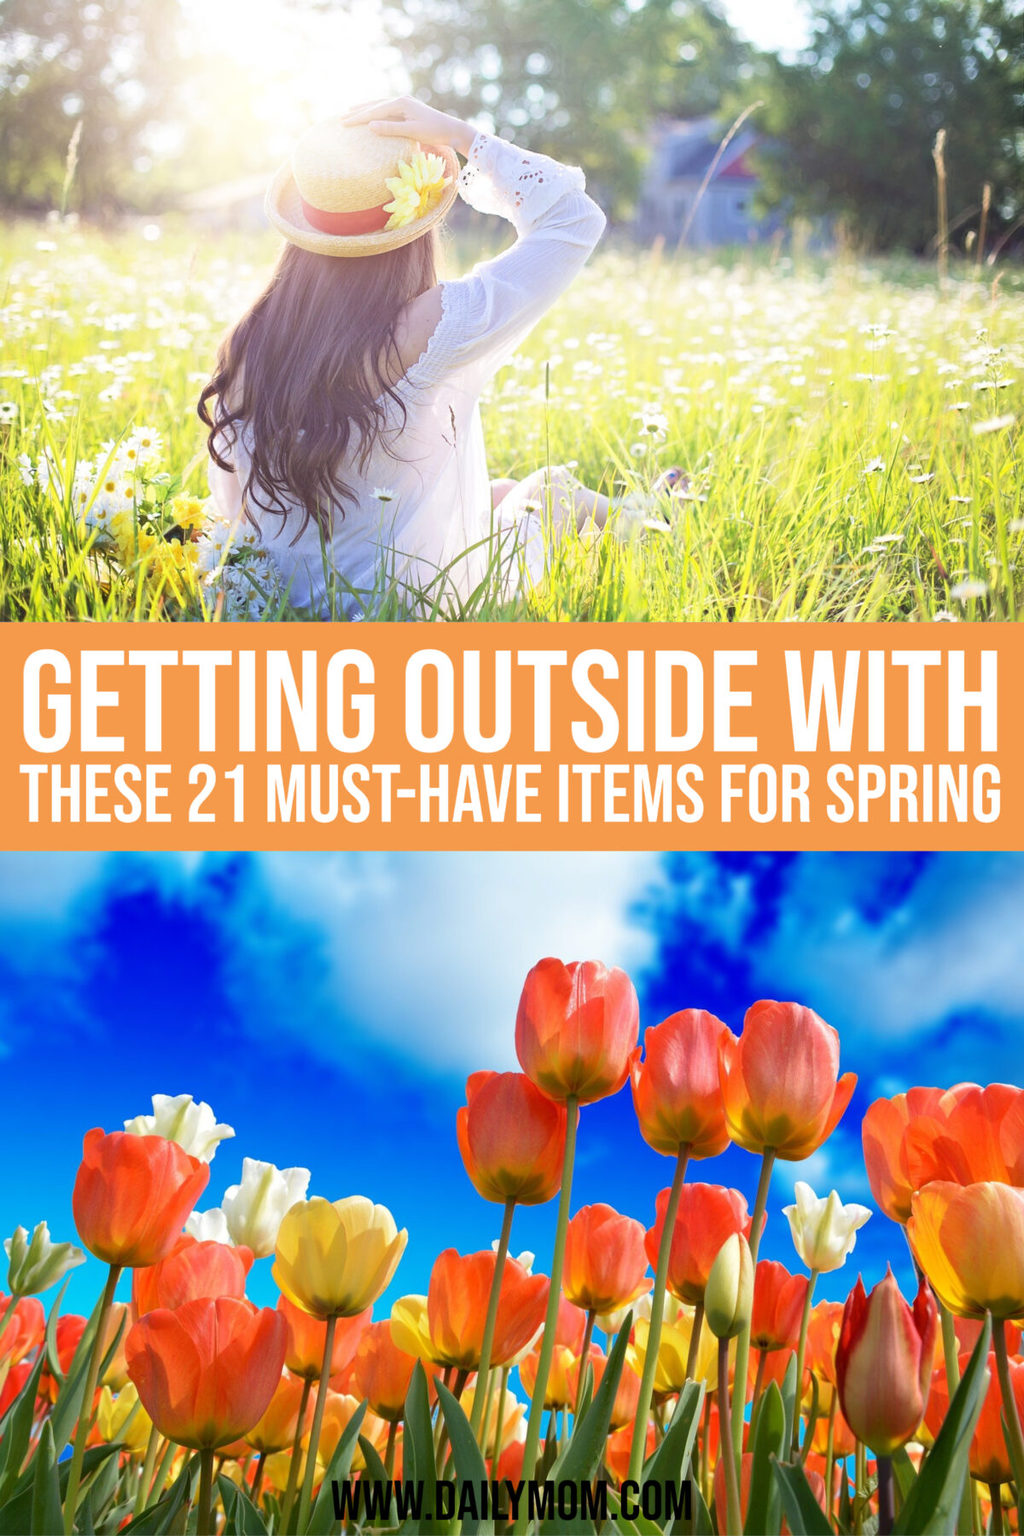 Getting Outside For Spring With These 21 Must-Have Items